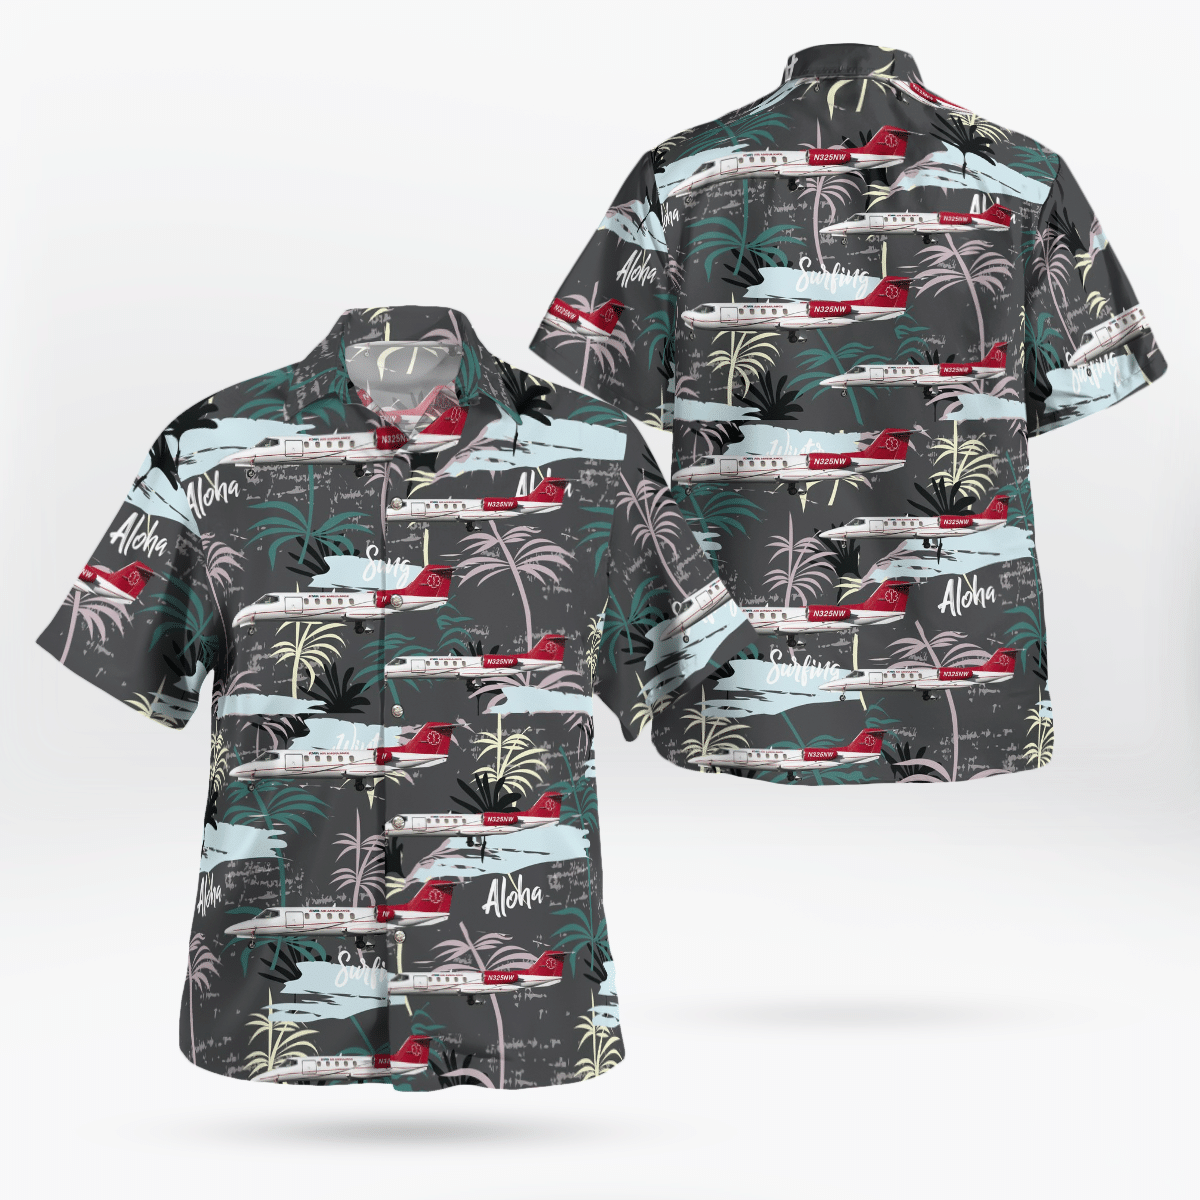 If you are in need of a new summertime look, pick up this Hawaiian shirt 68